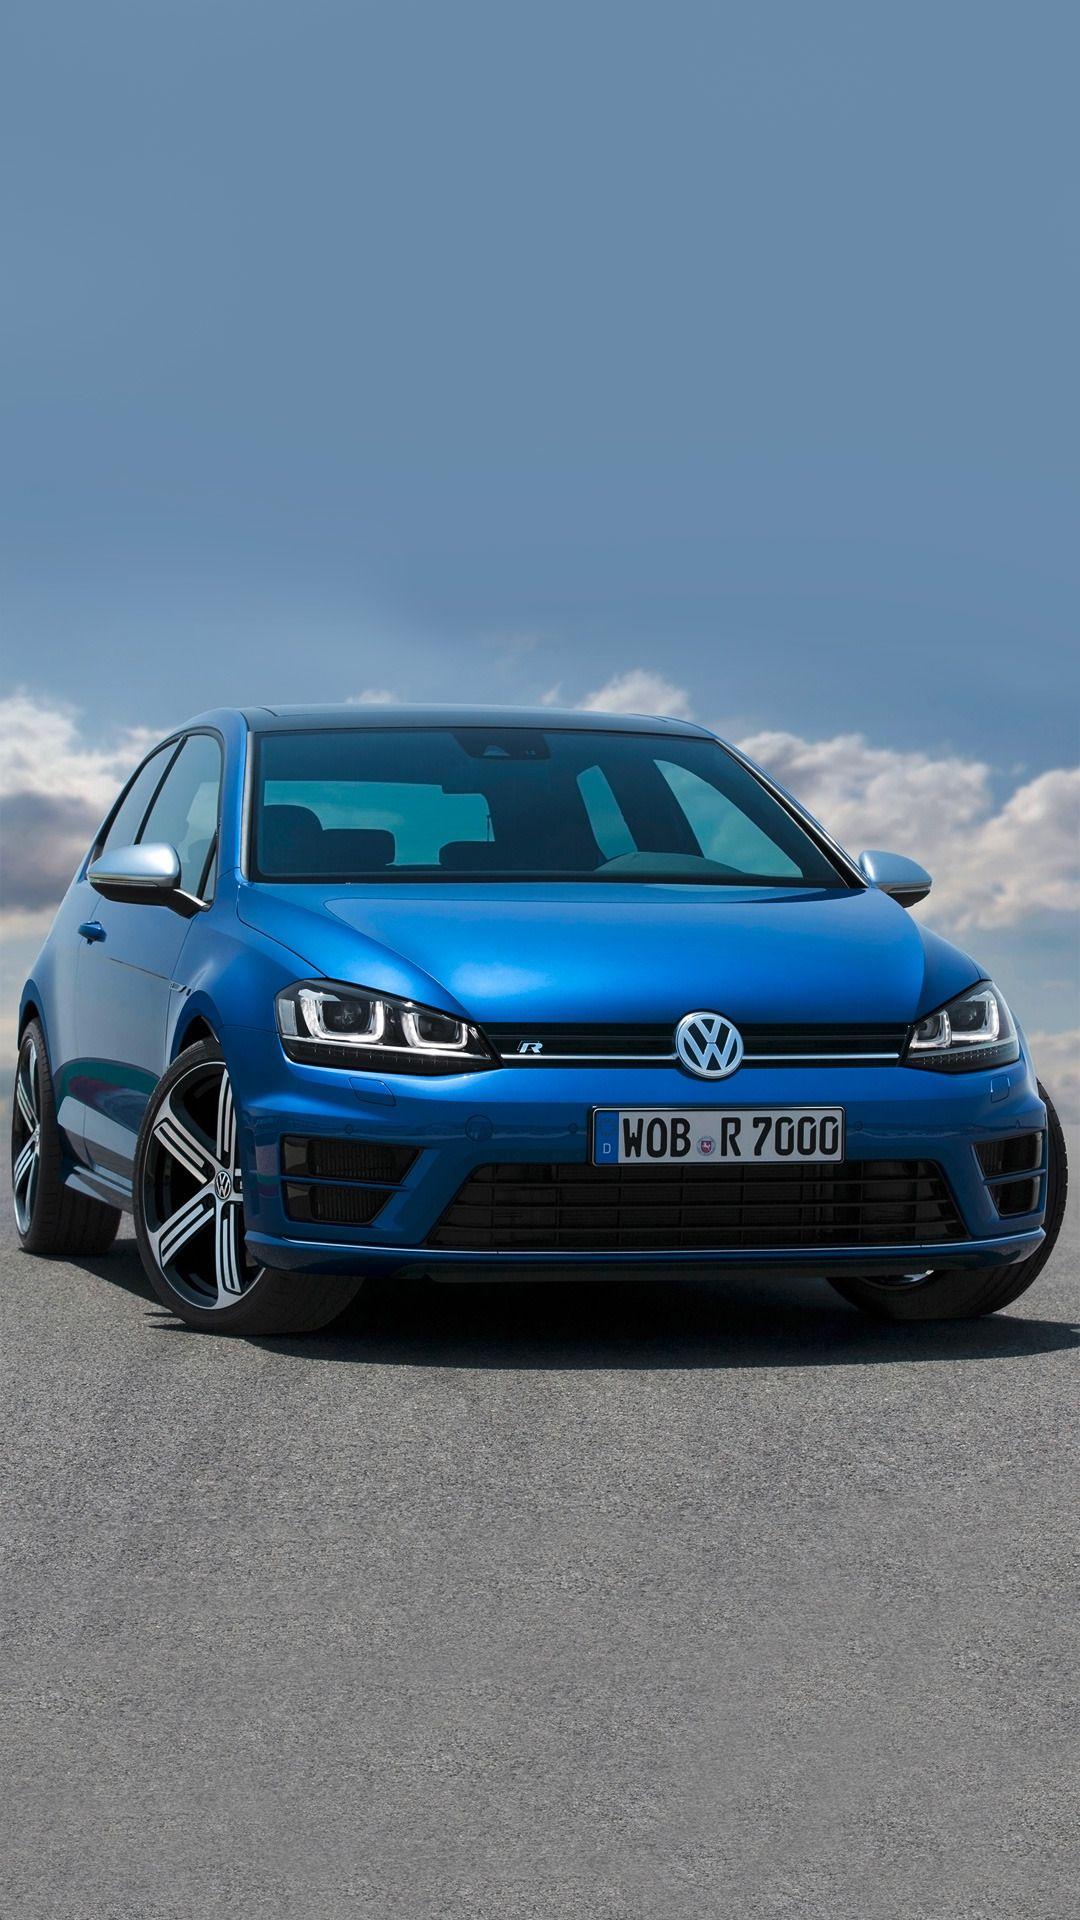 Volkswagen Golf 7 htc one wallpaper, free and easy to download